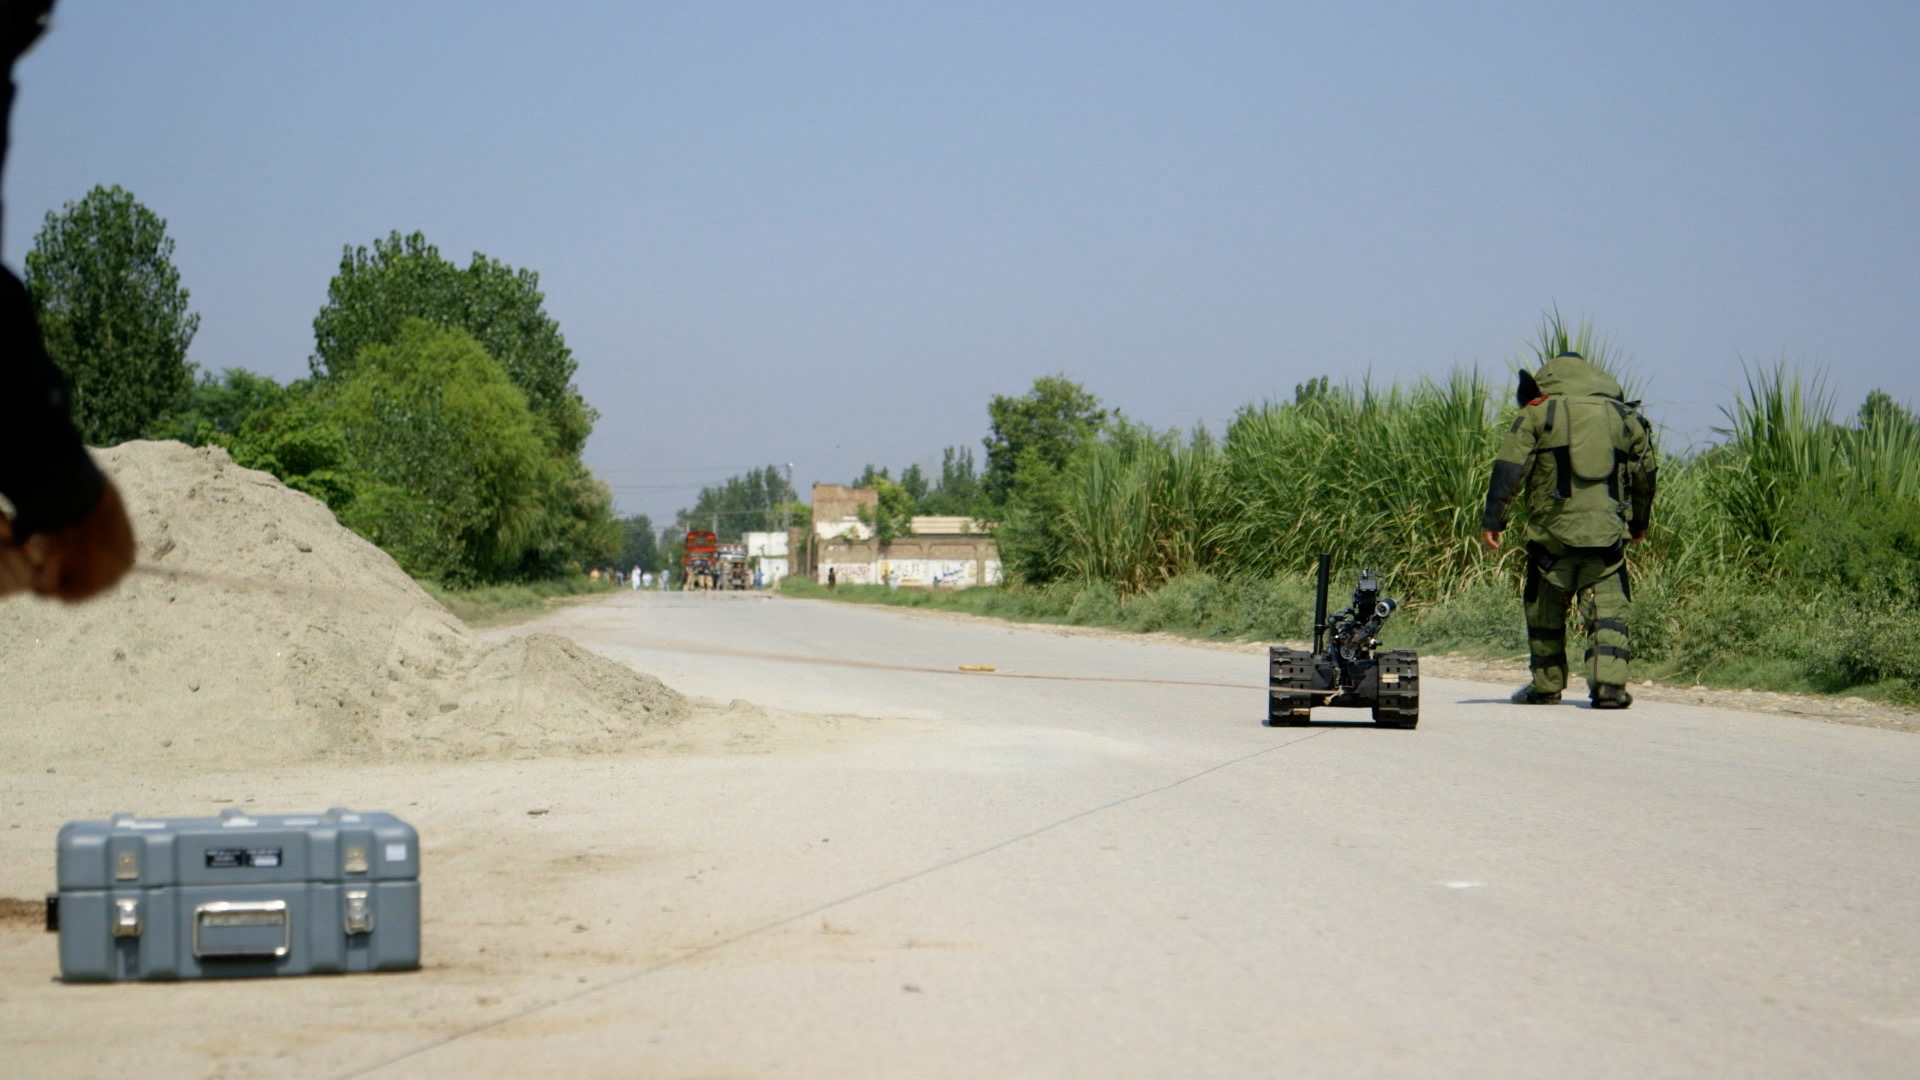 A bomb technician works to disassemble a roadside explosive left by the TTP.